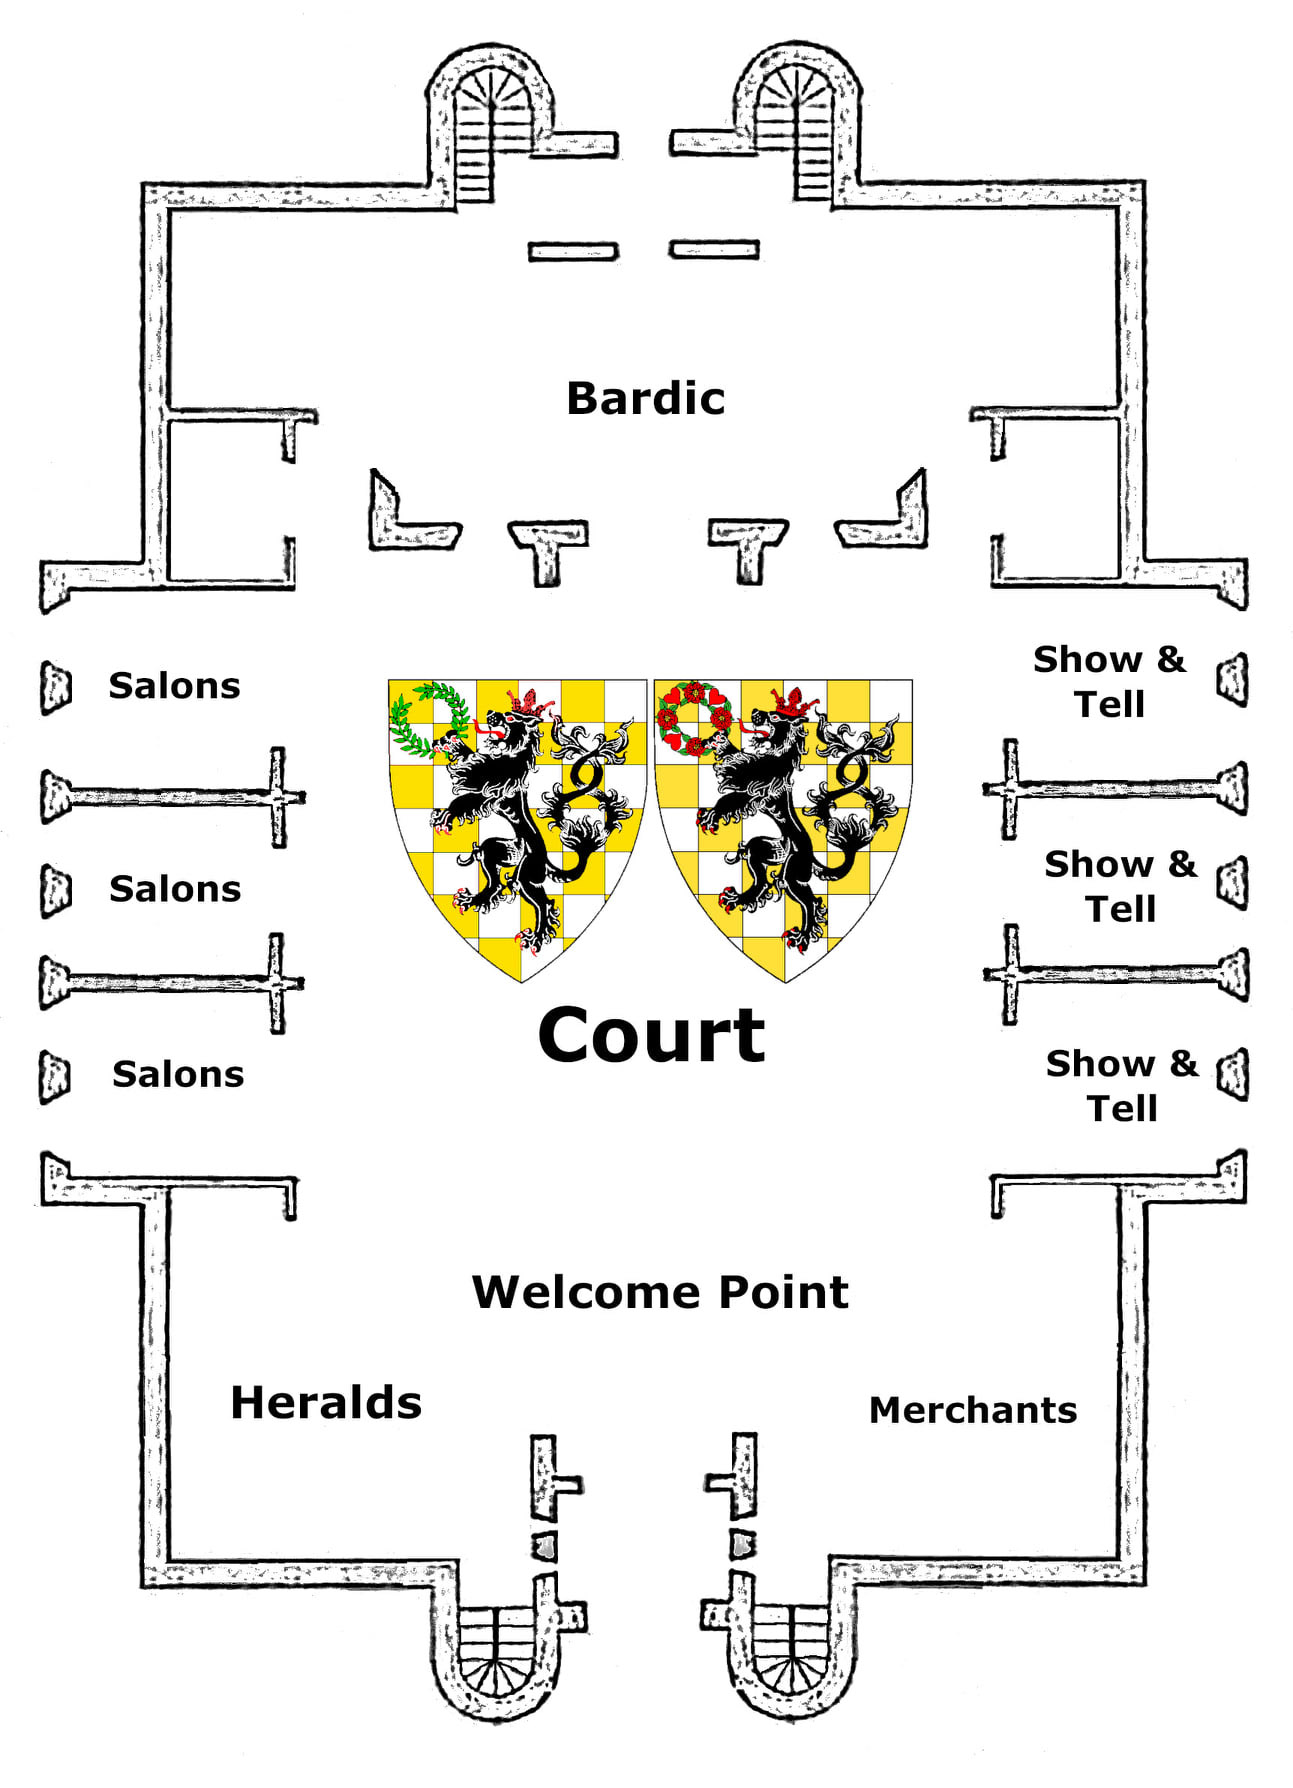 Ethereal 12th Night – Site Map